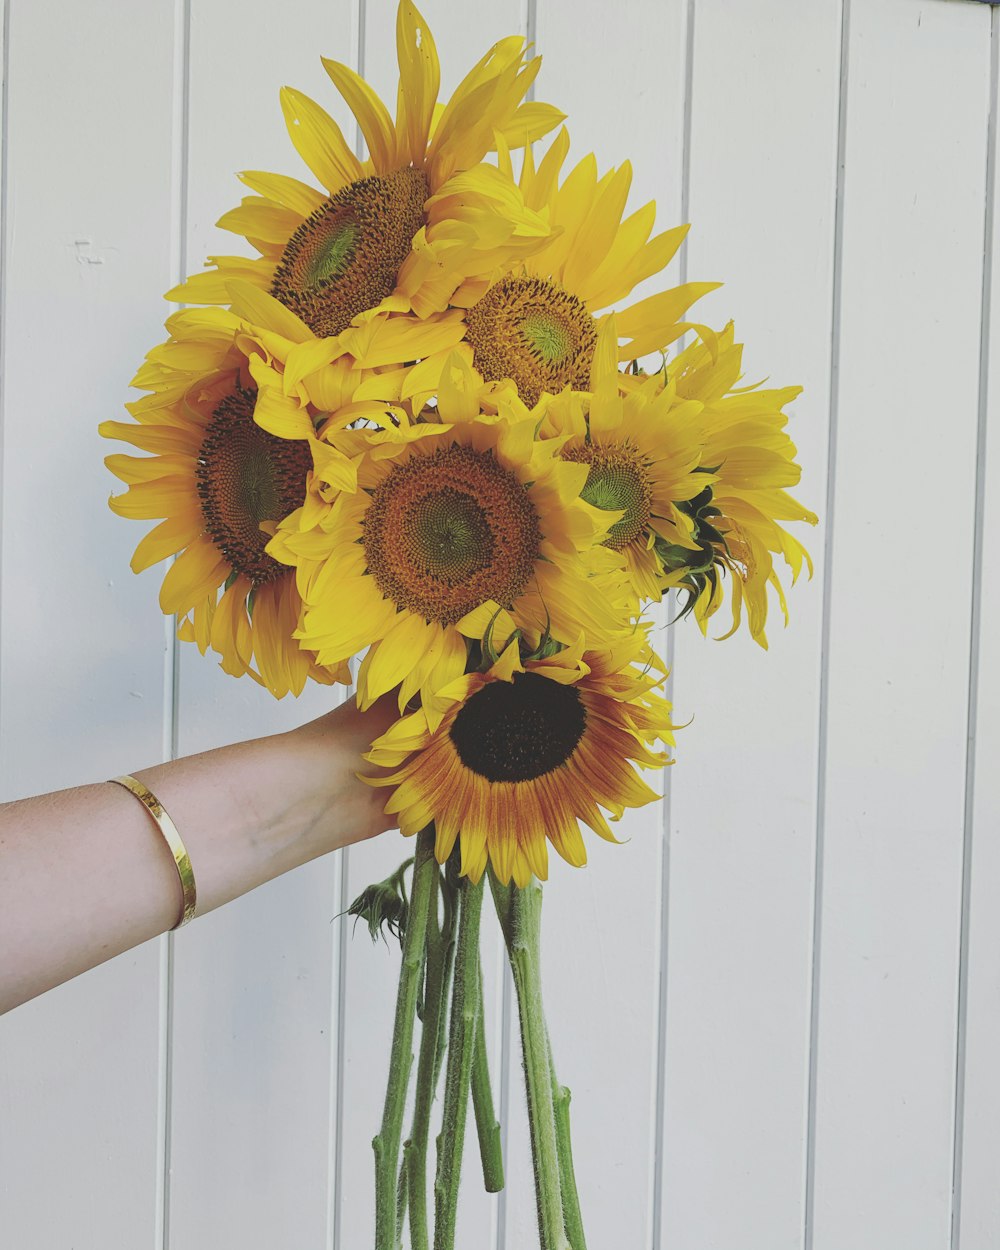 person holding sunflower bouquet in front of white wall